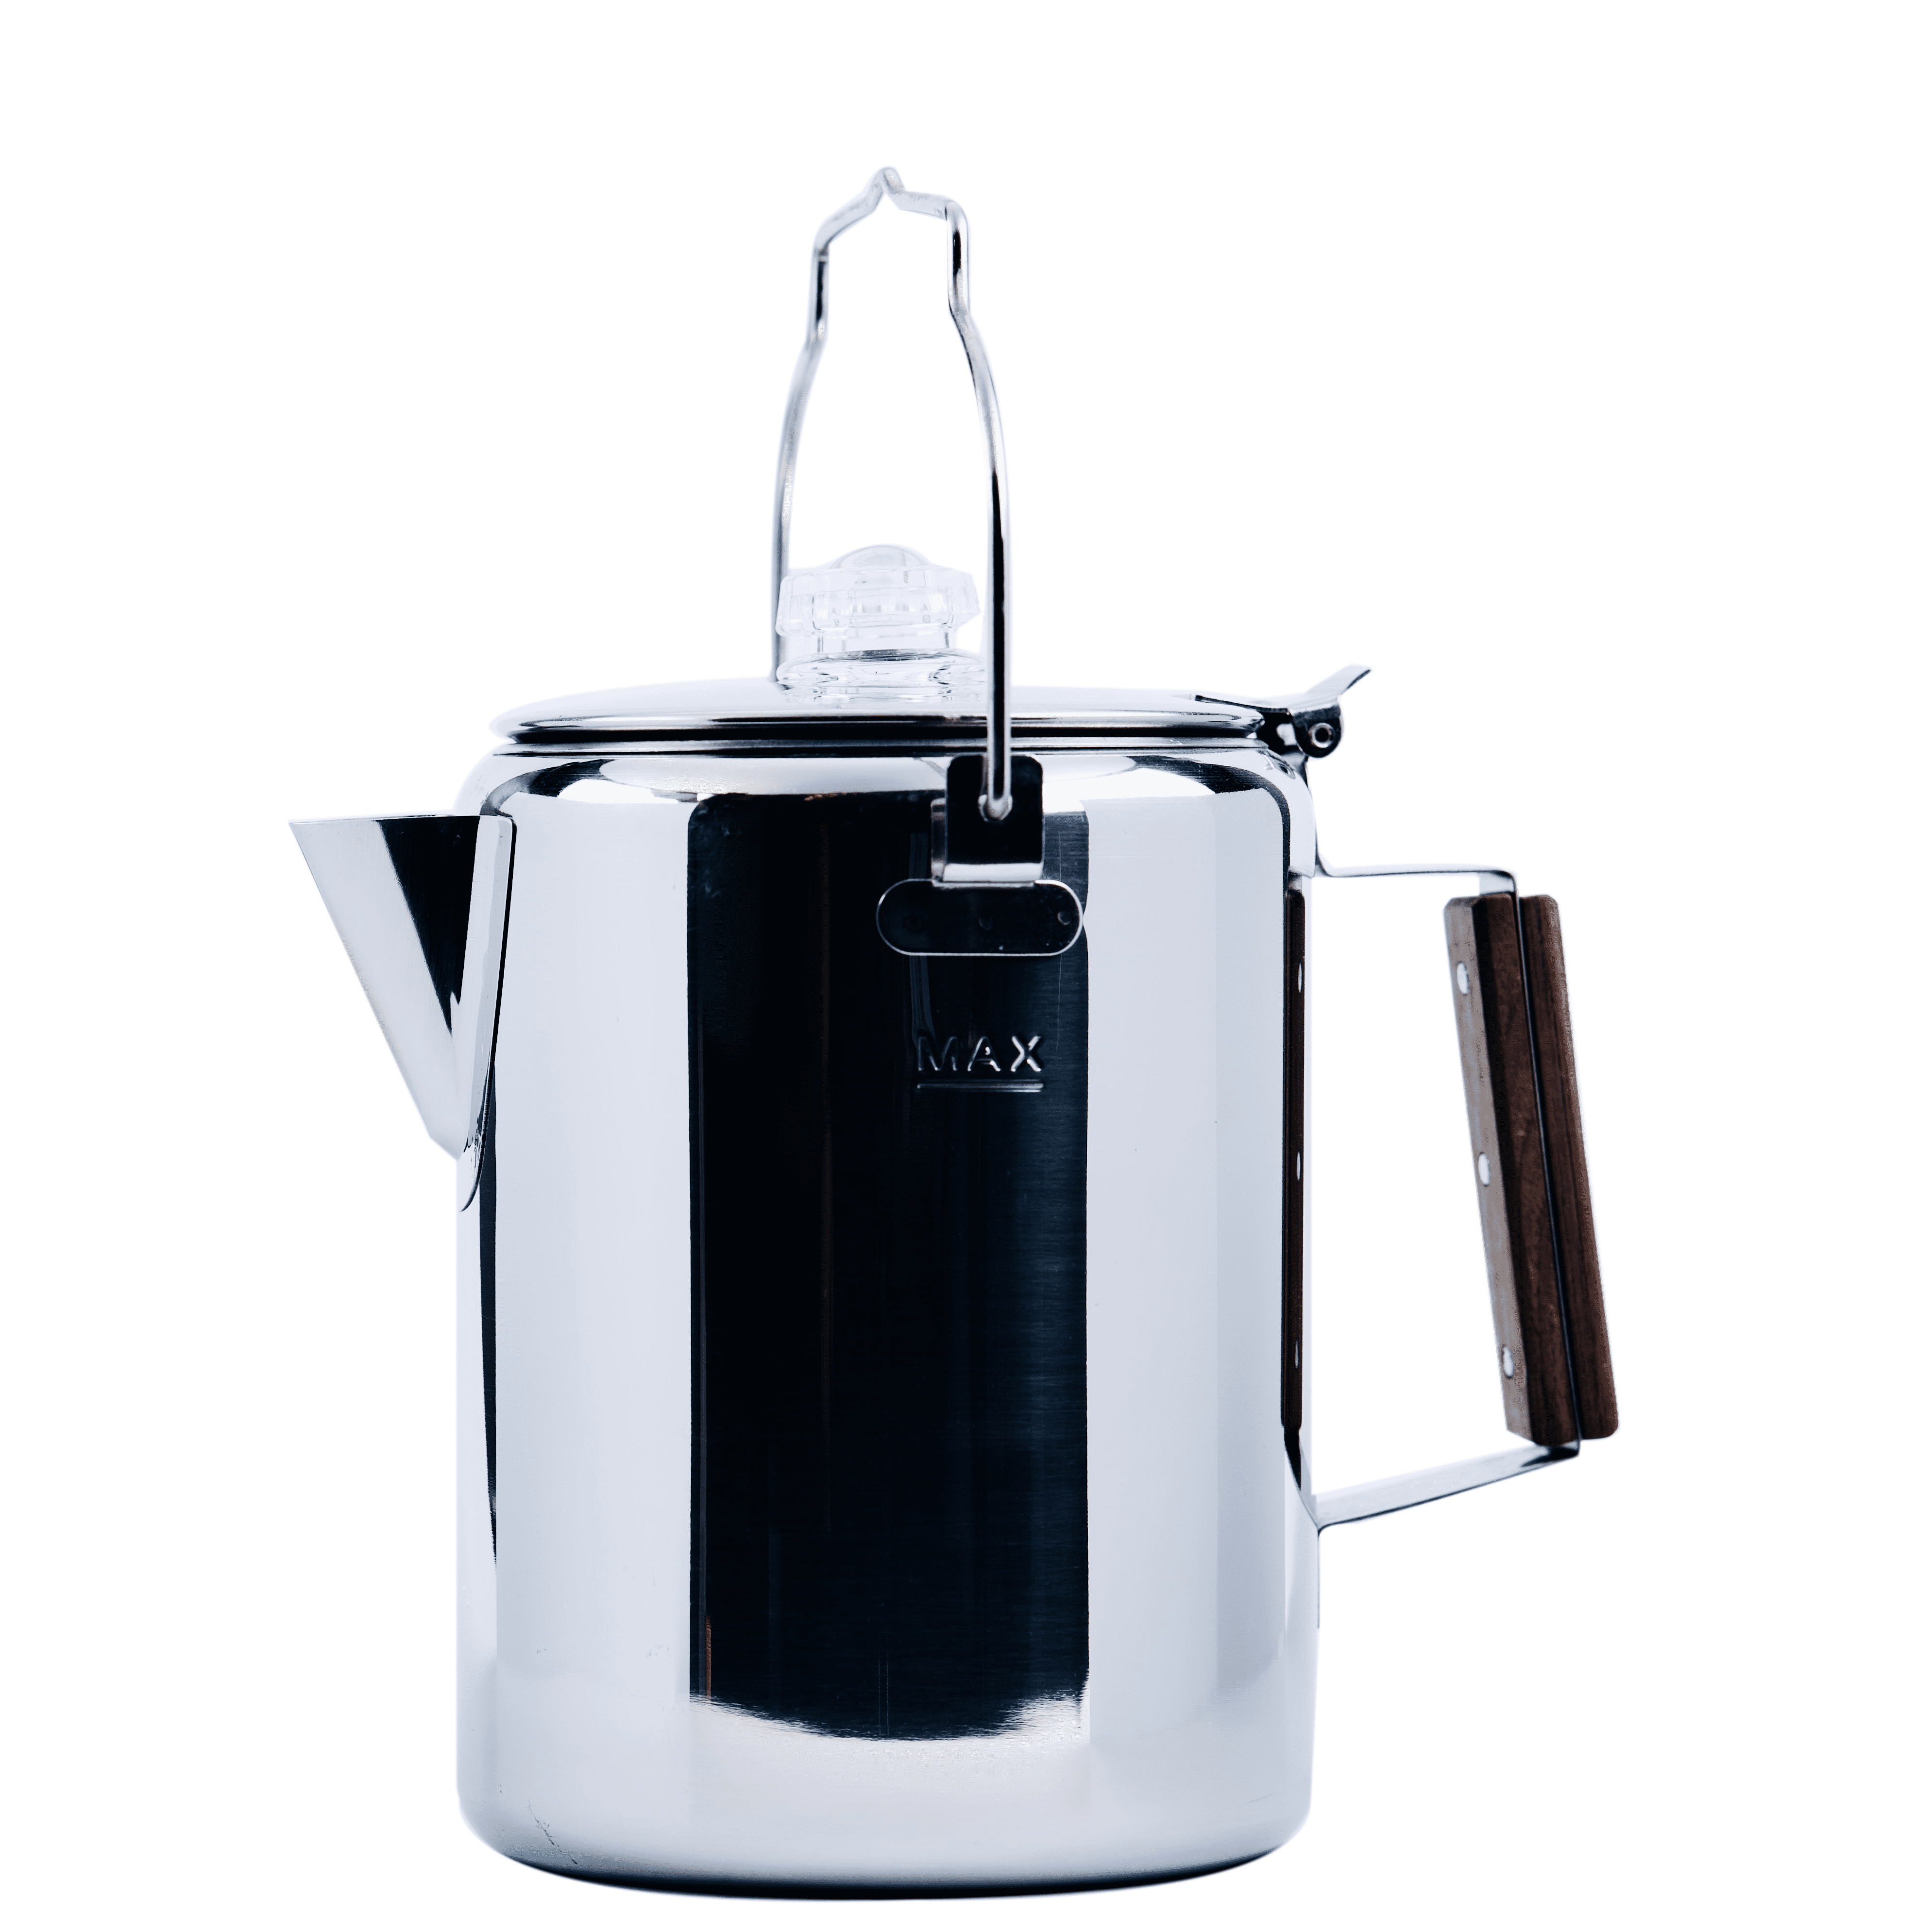 Is this percolator with 5-star reviews the best percolator?